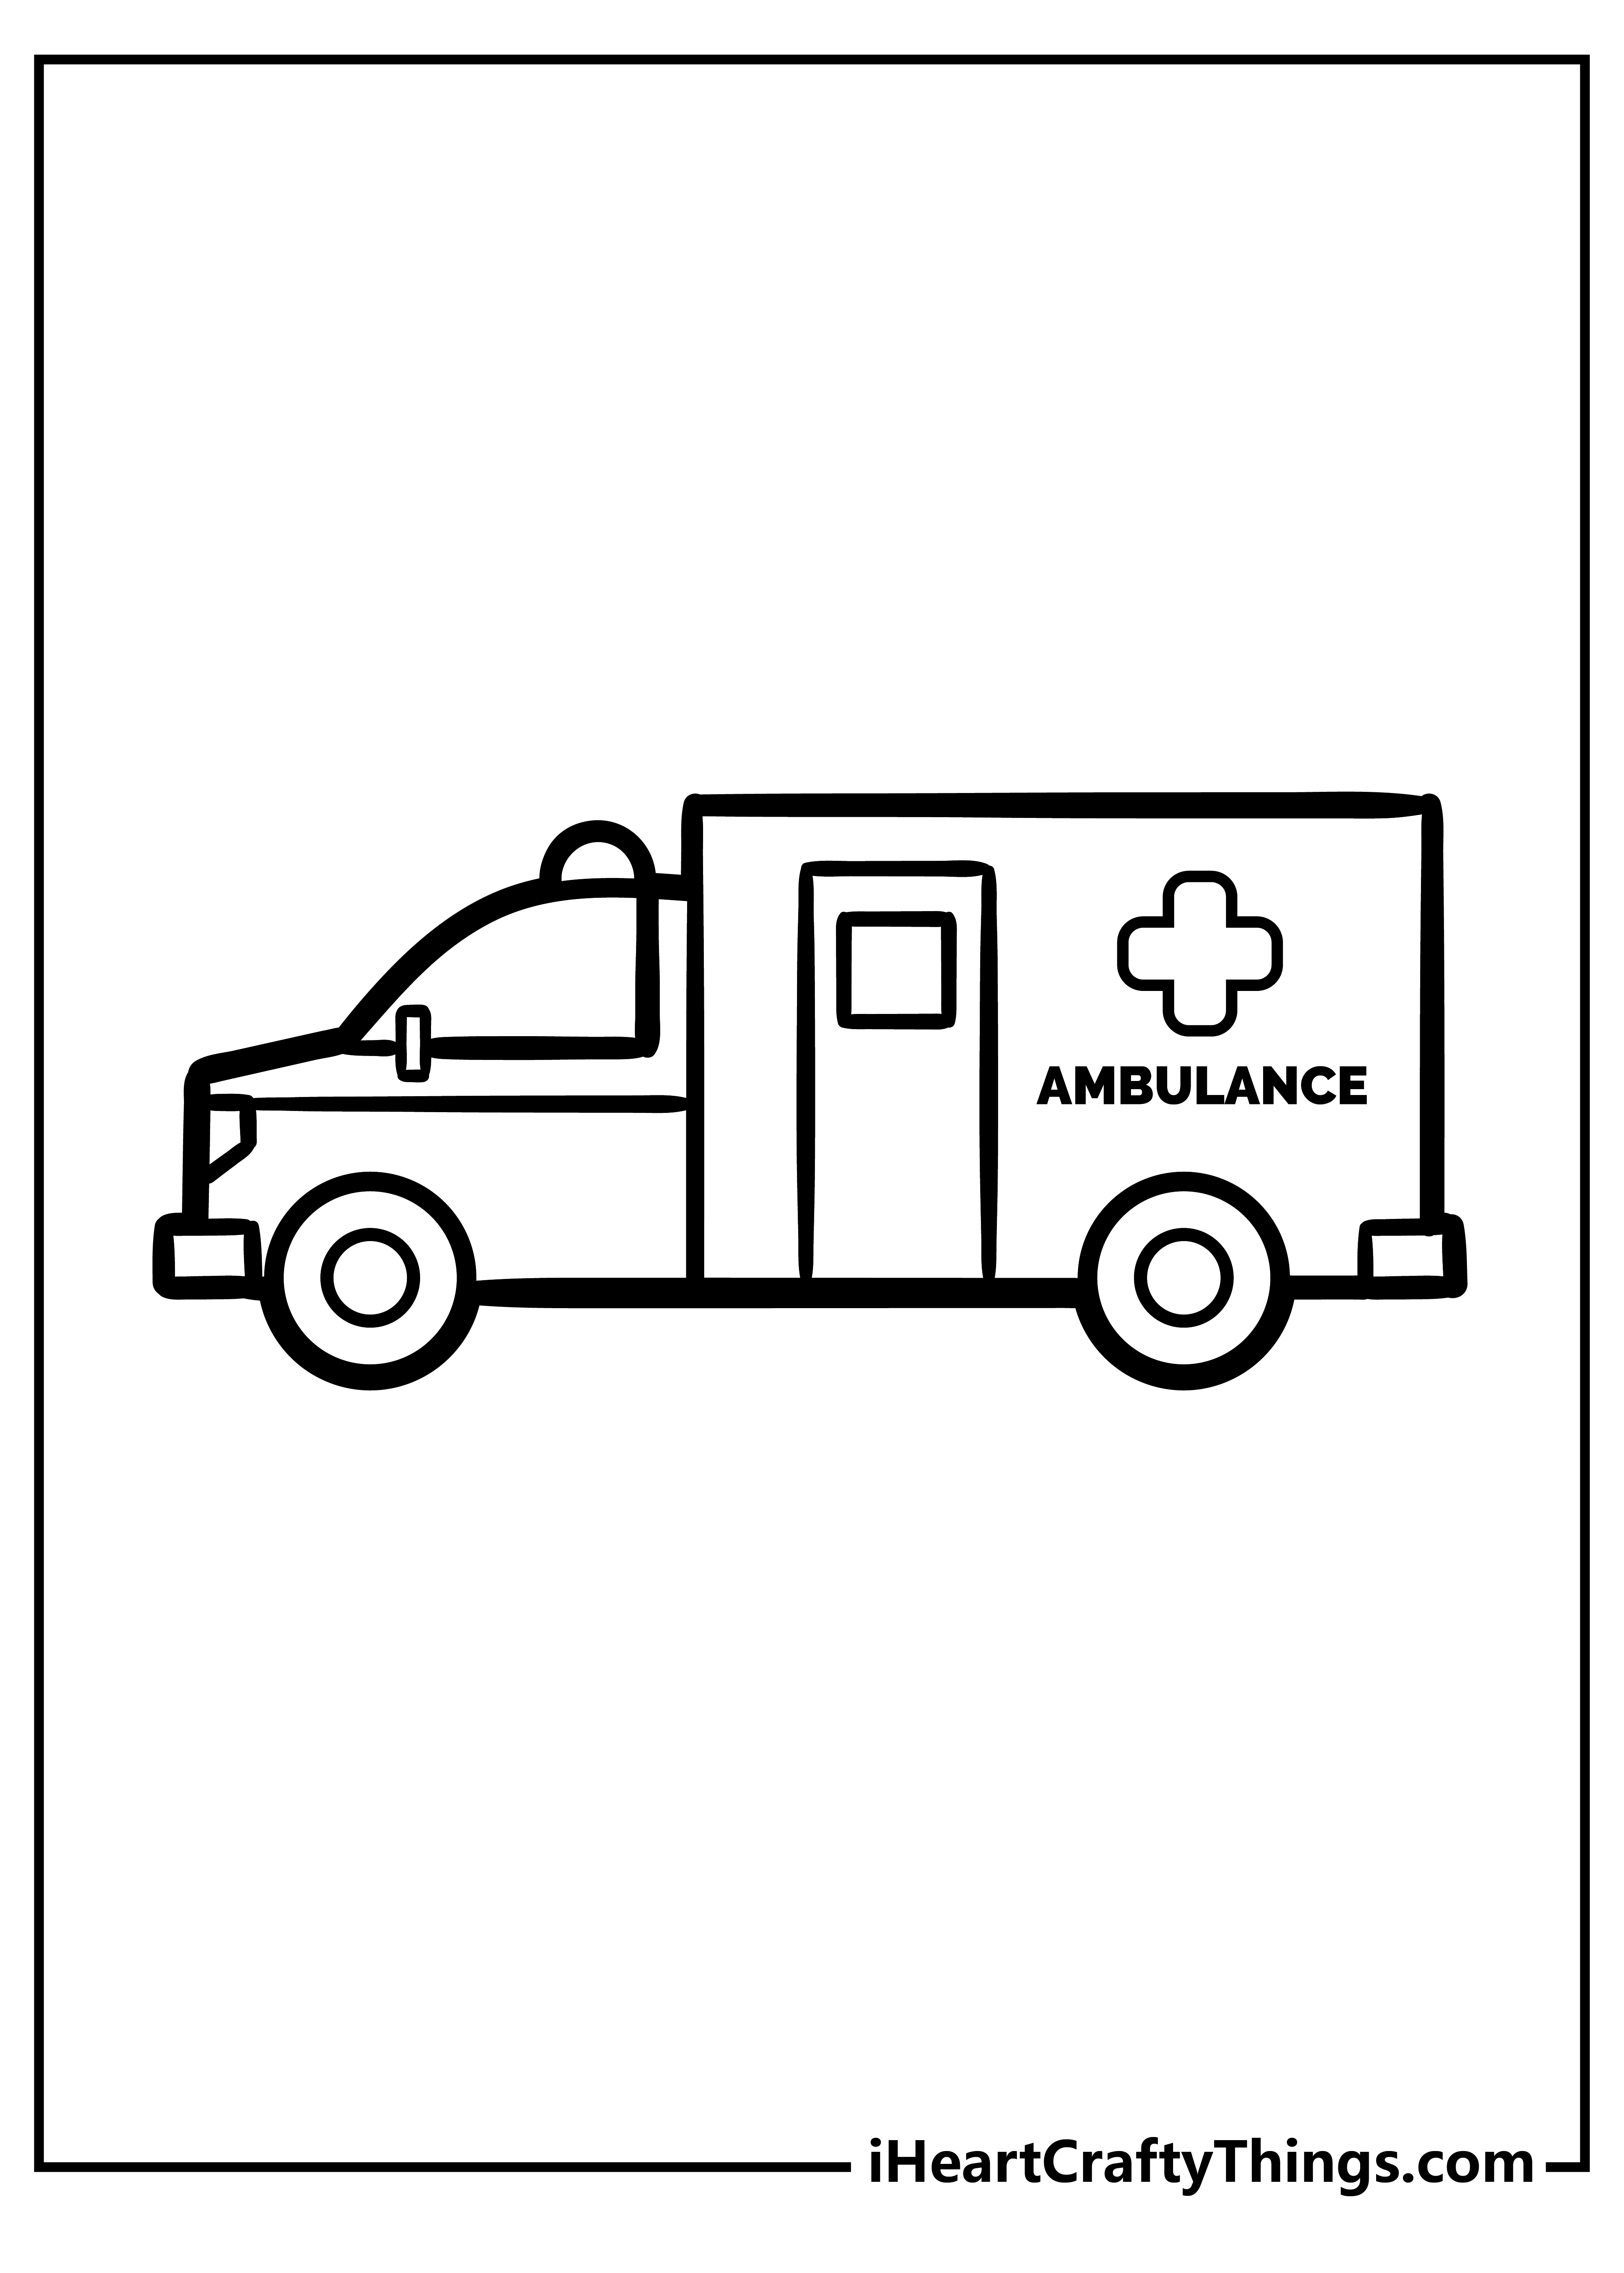 Ambulance pages free printables